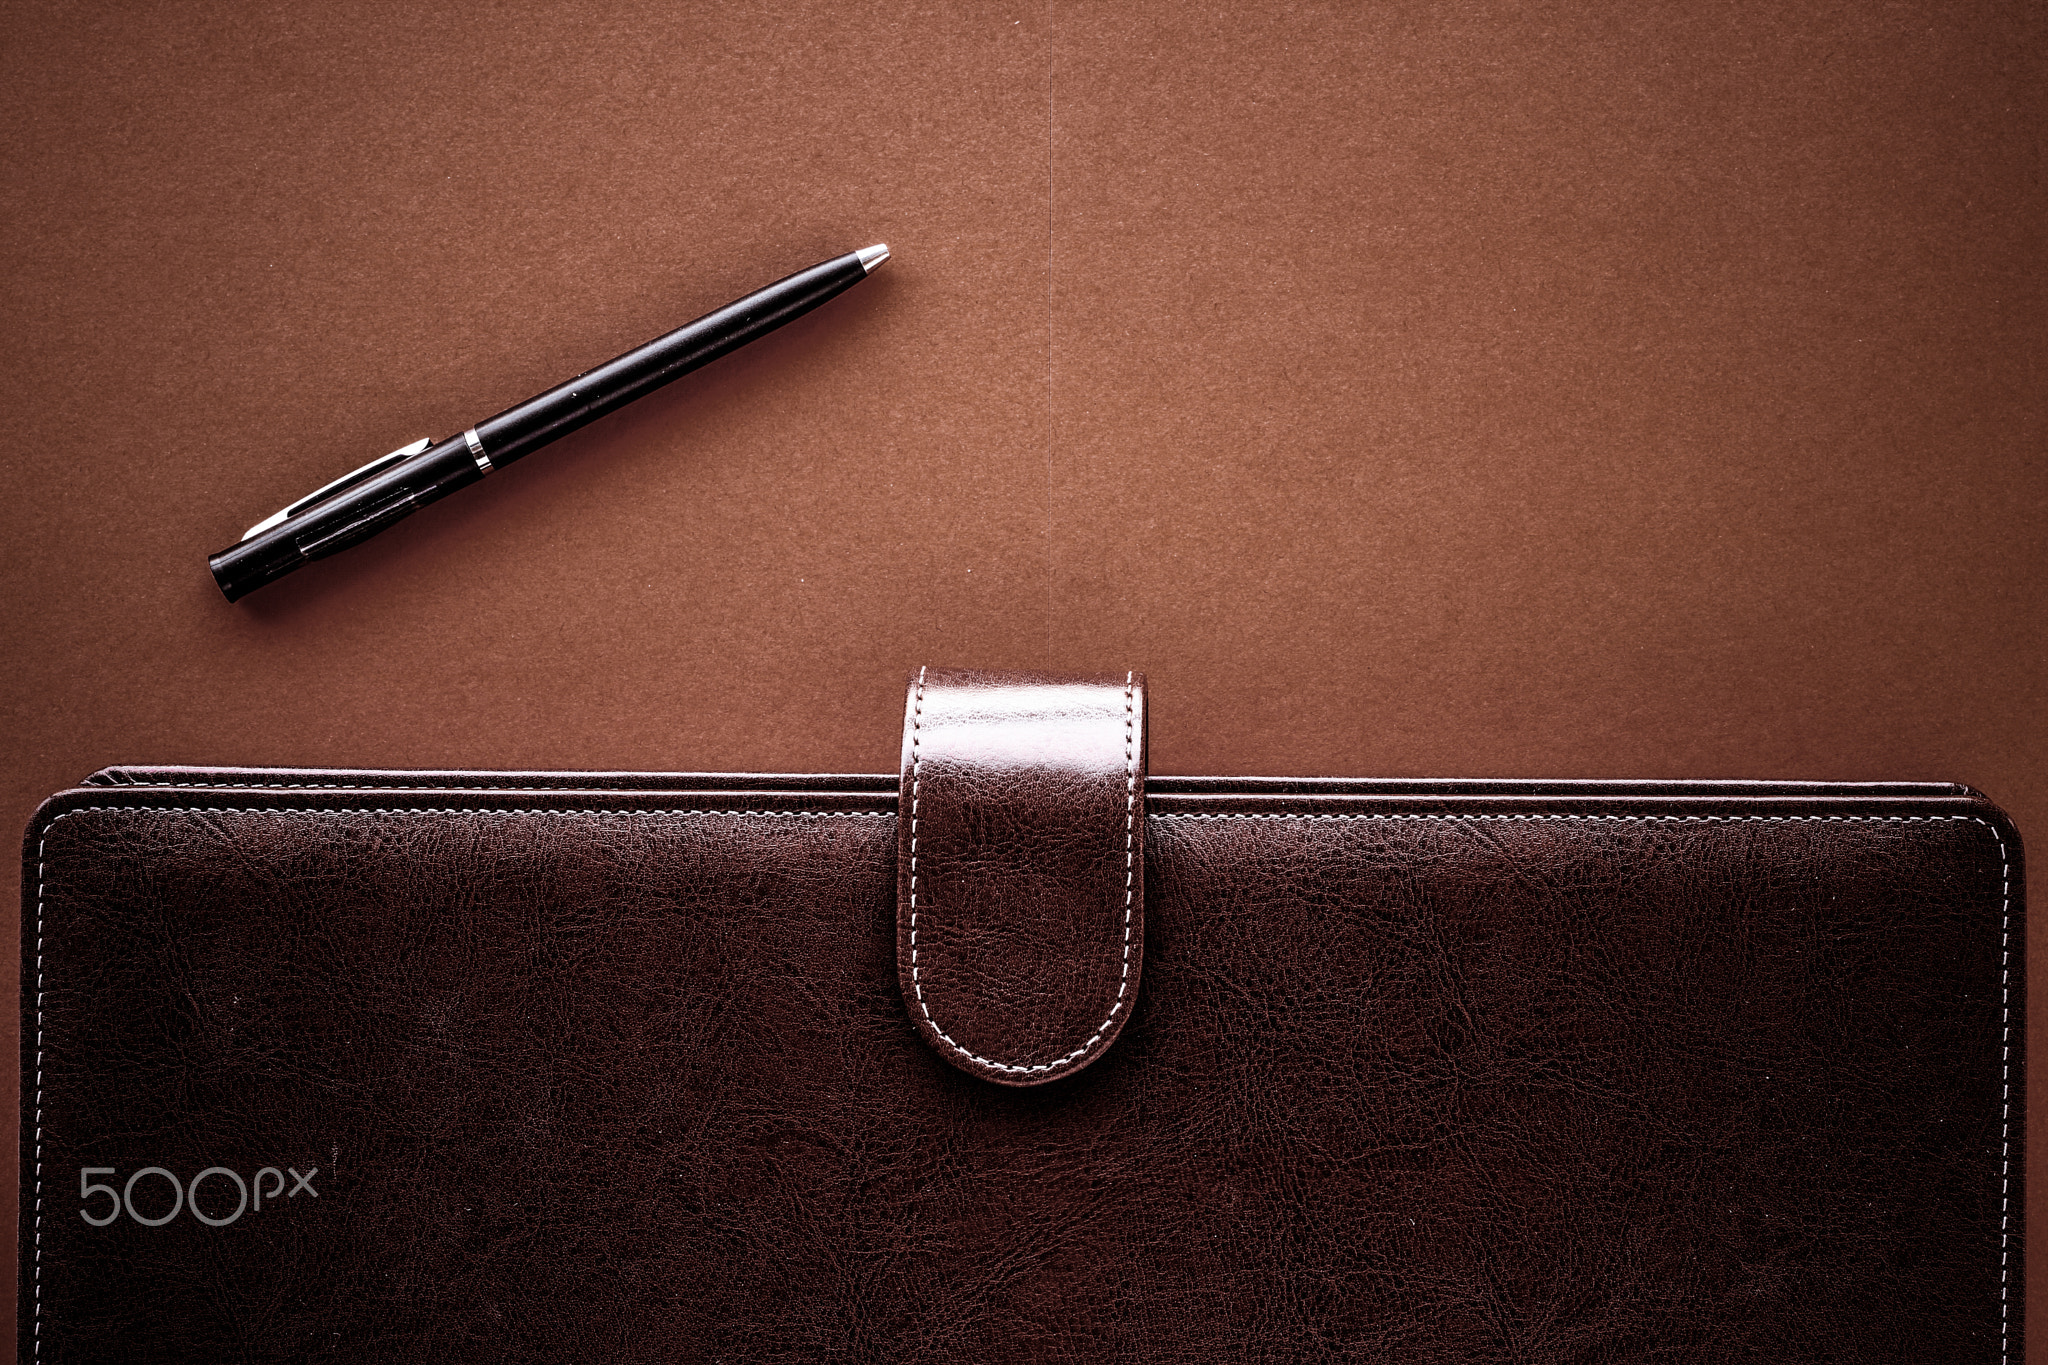 Vintage business briefcase on the office table desk, flatlay